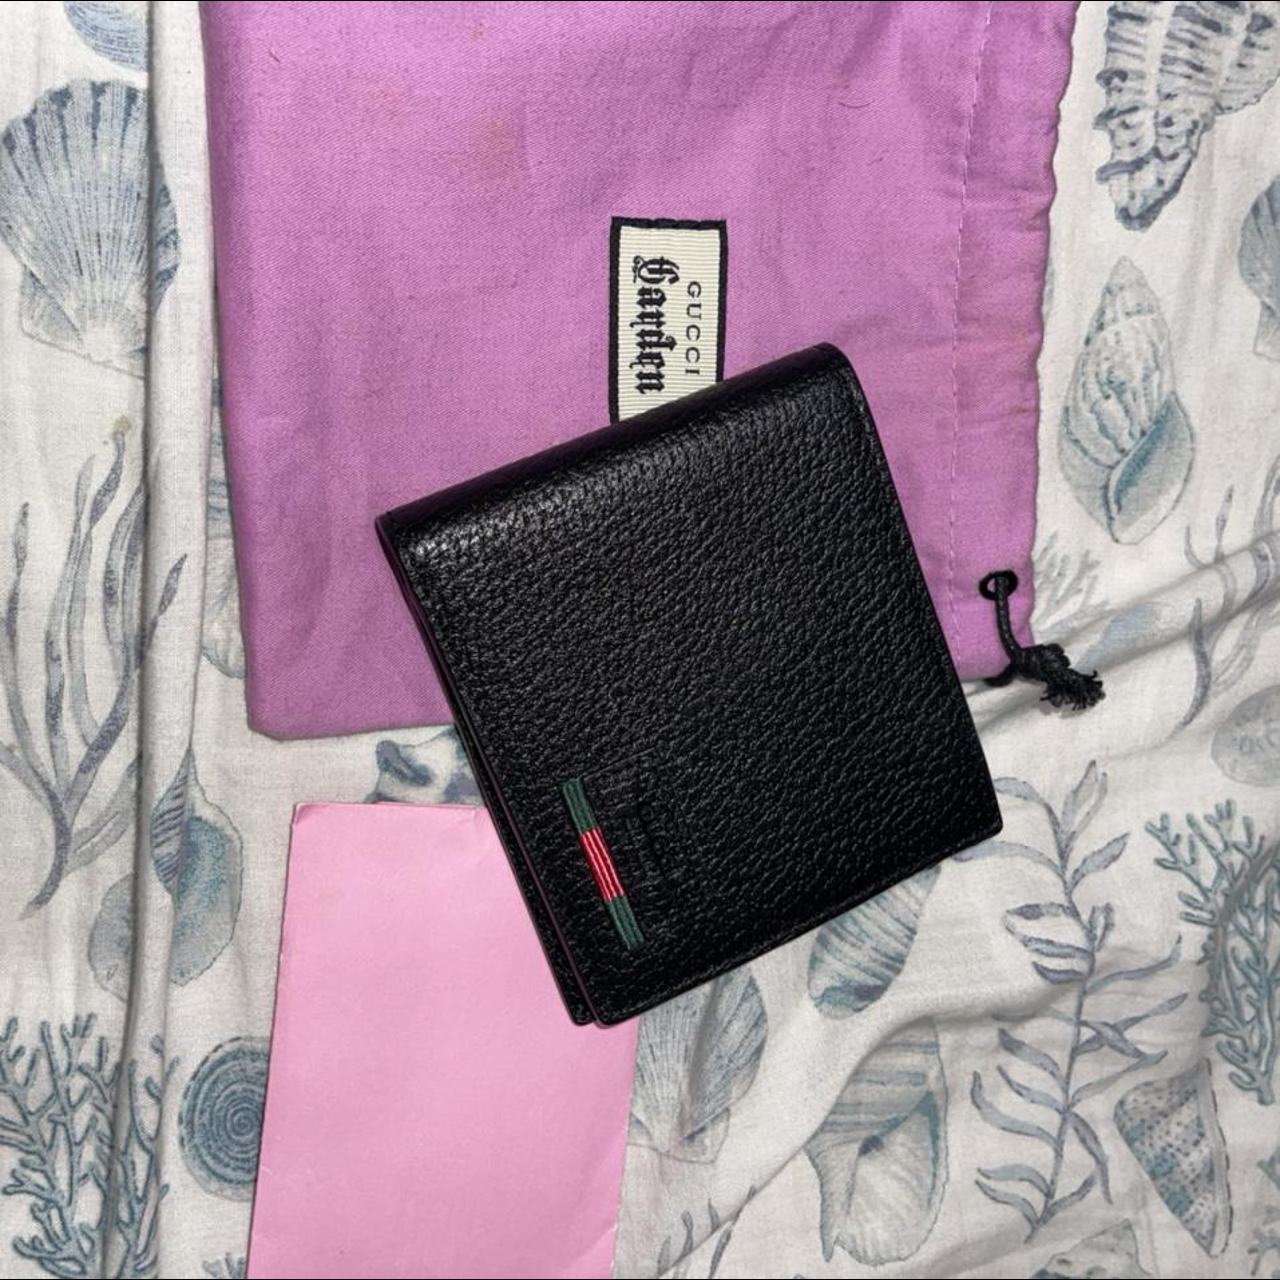 Product Image 1 - Gucci wallet retail was around